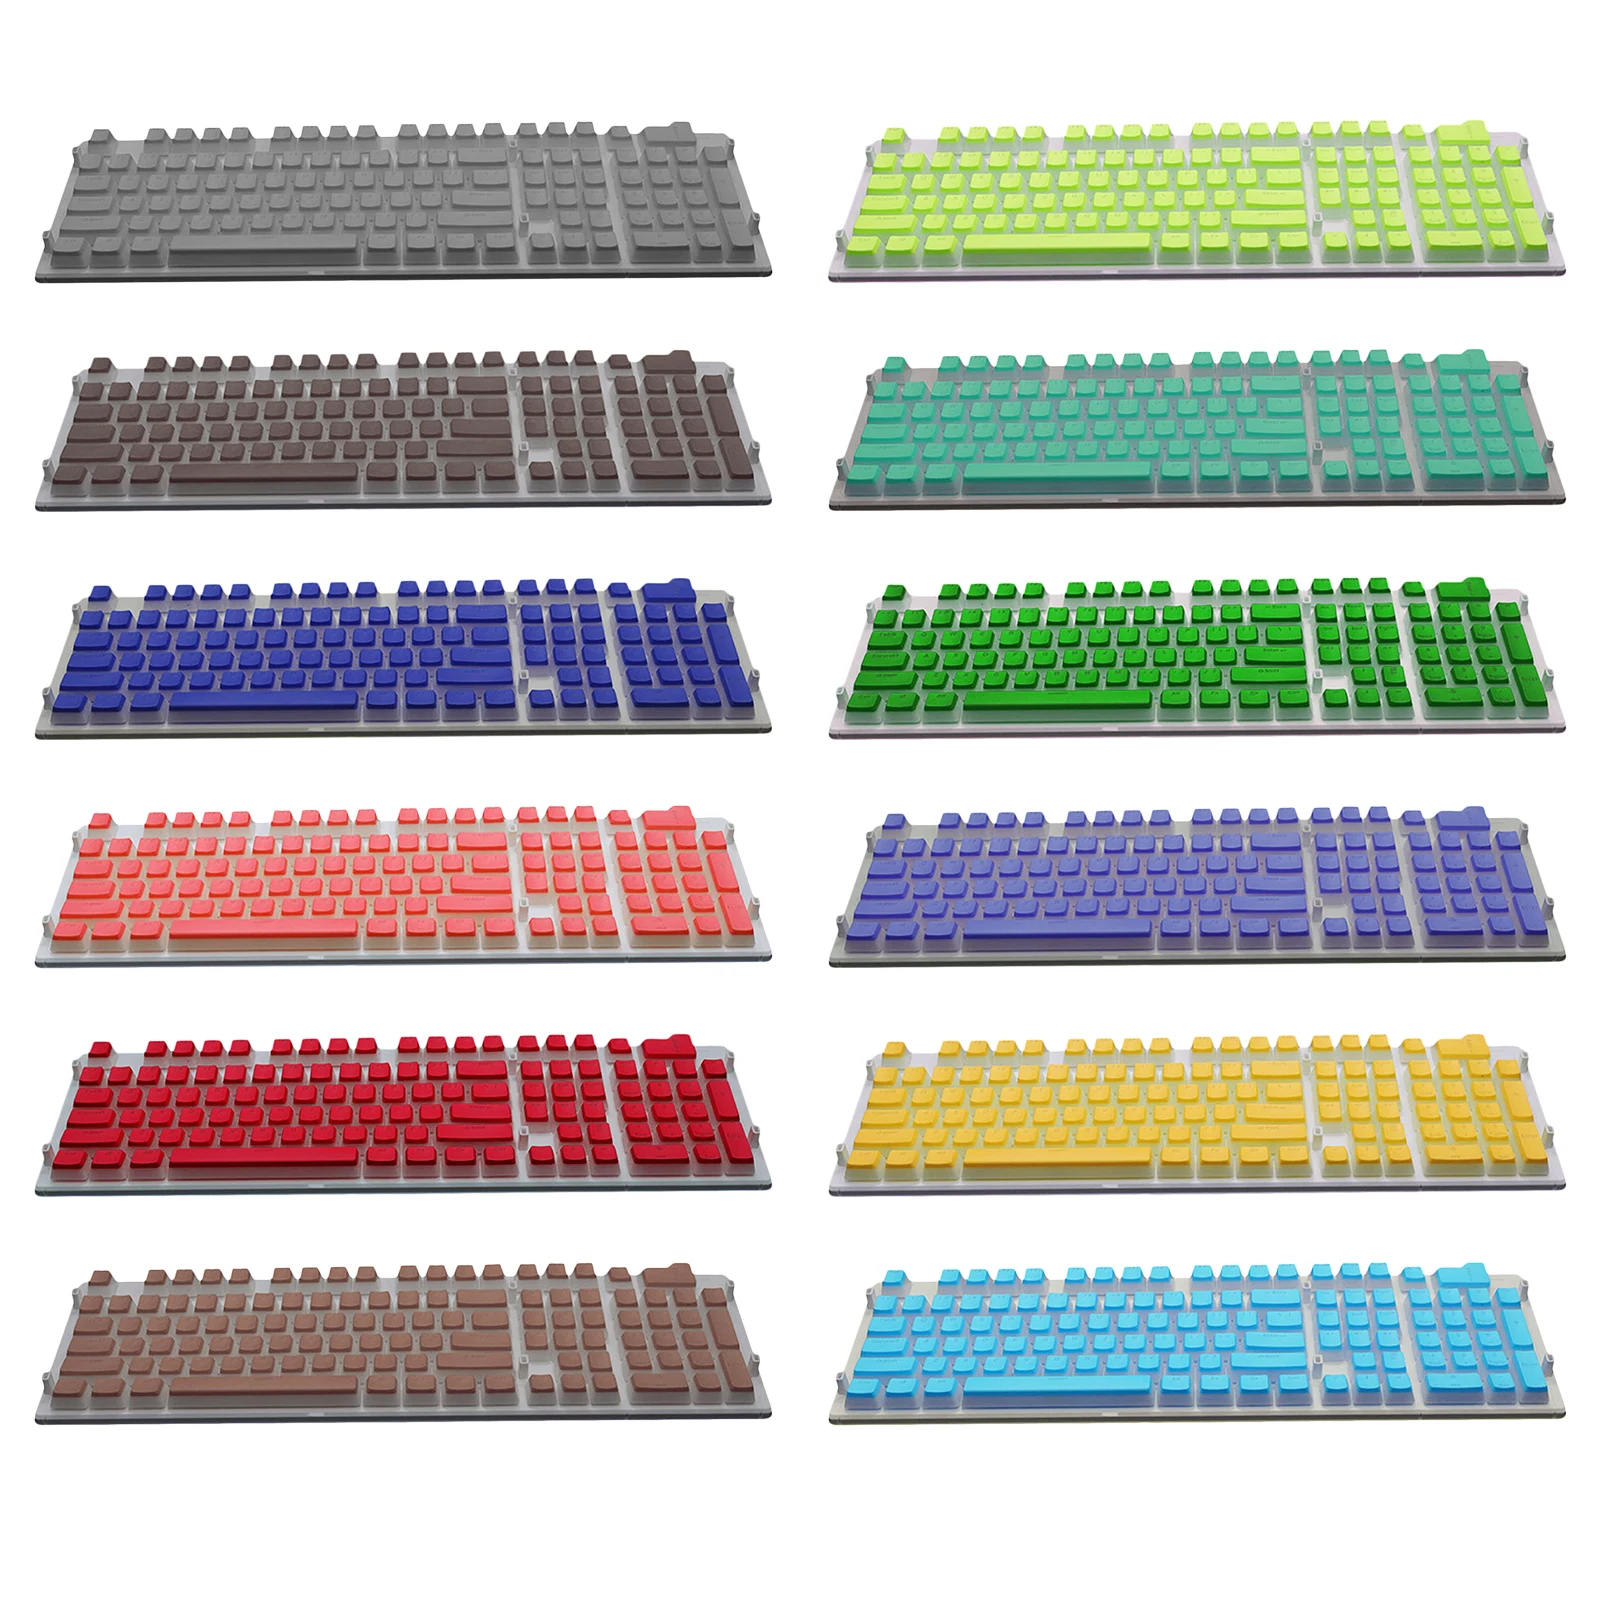 108 Keys Double Shot PBT Pudding Keycaps for Mechanical Gaming Keyboard, not